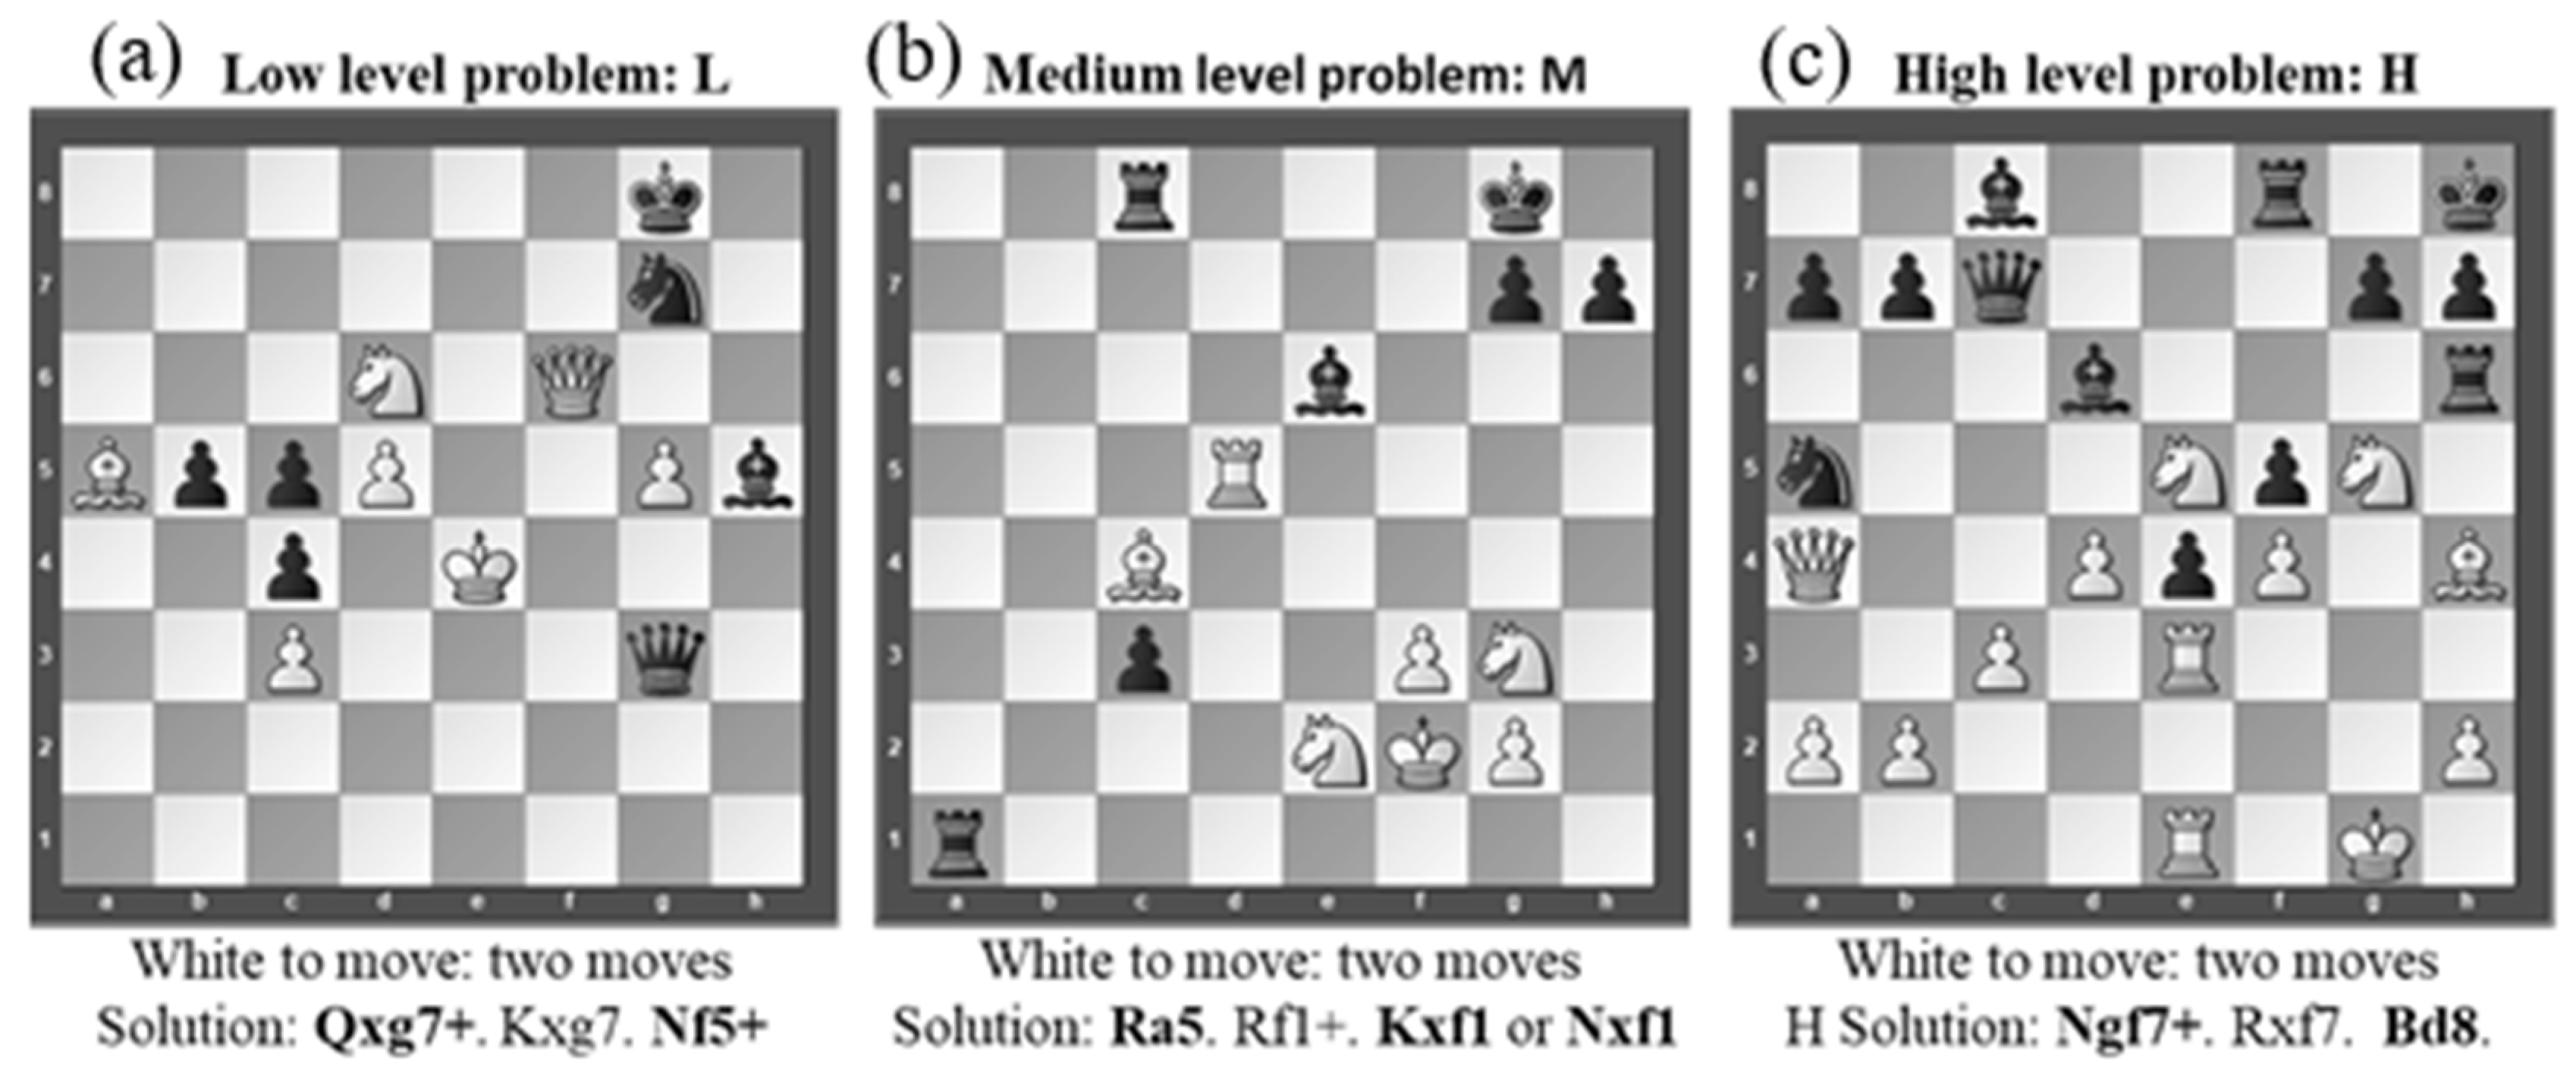 Do Puzzles Matter? - A Data Analysis : r/chess